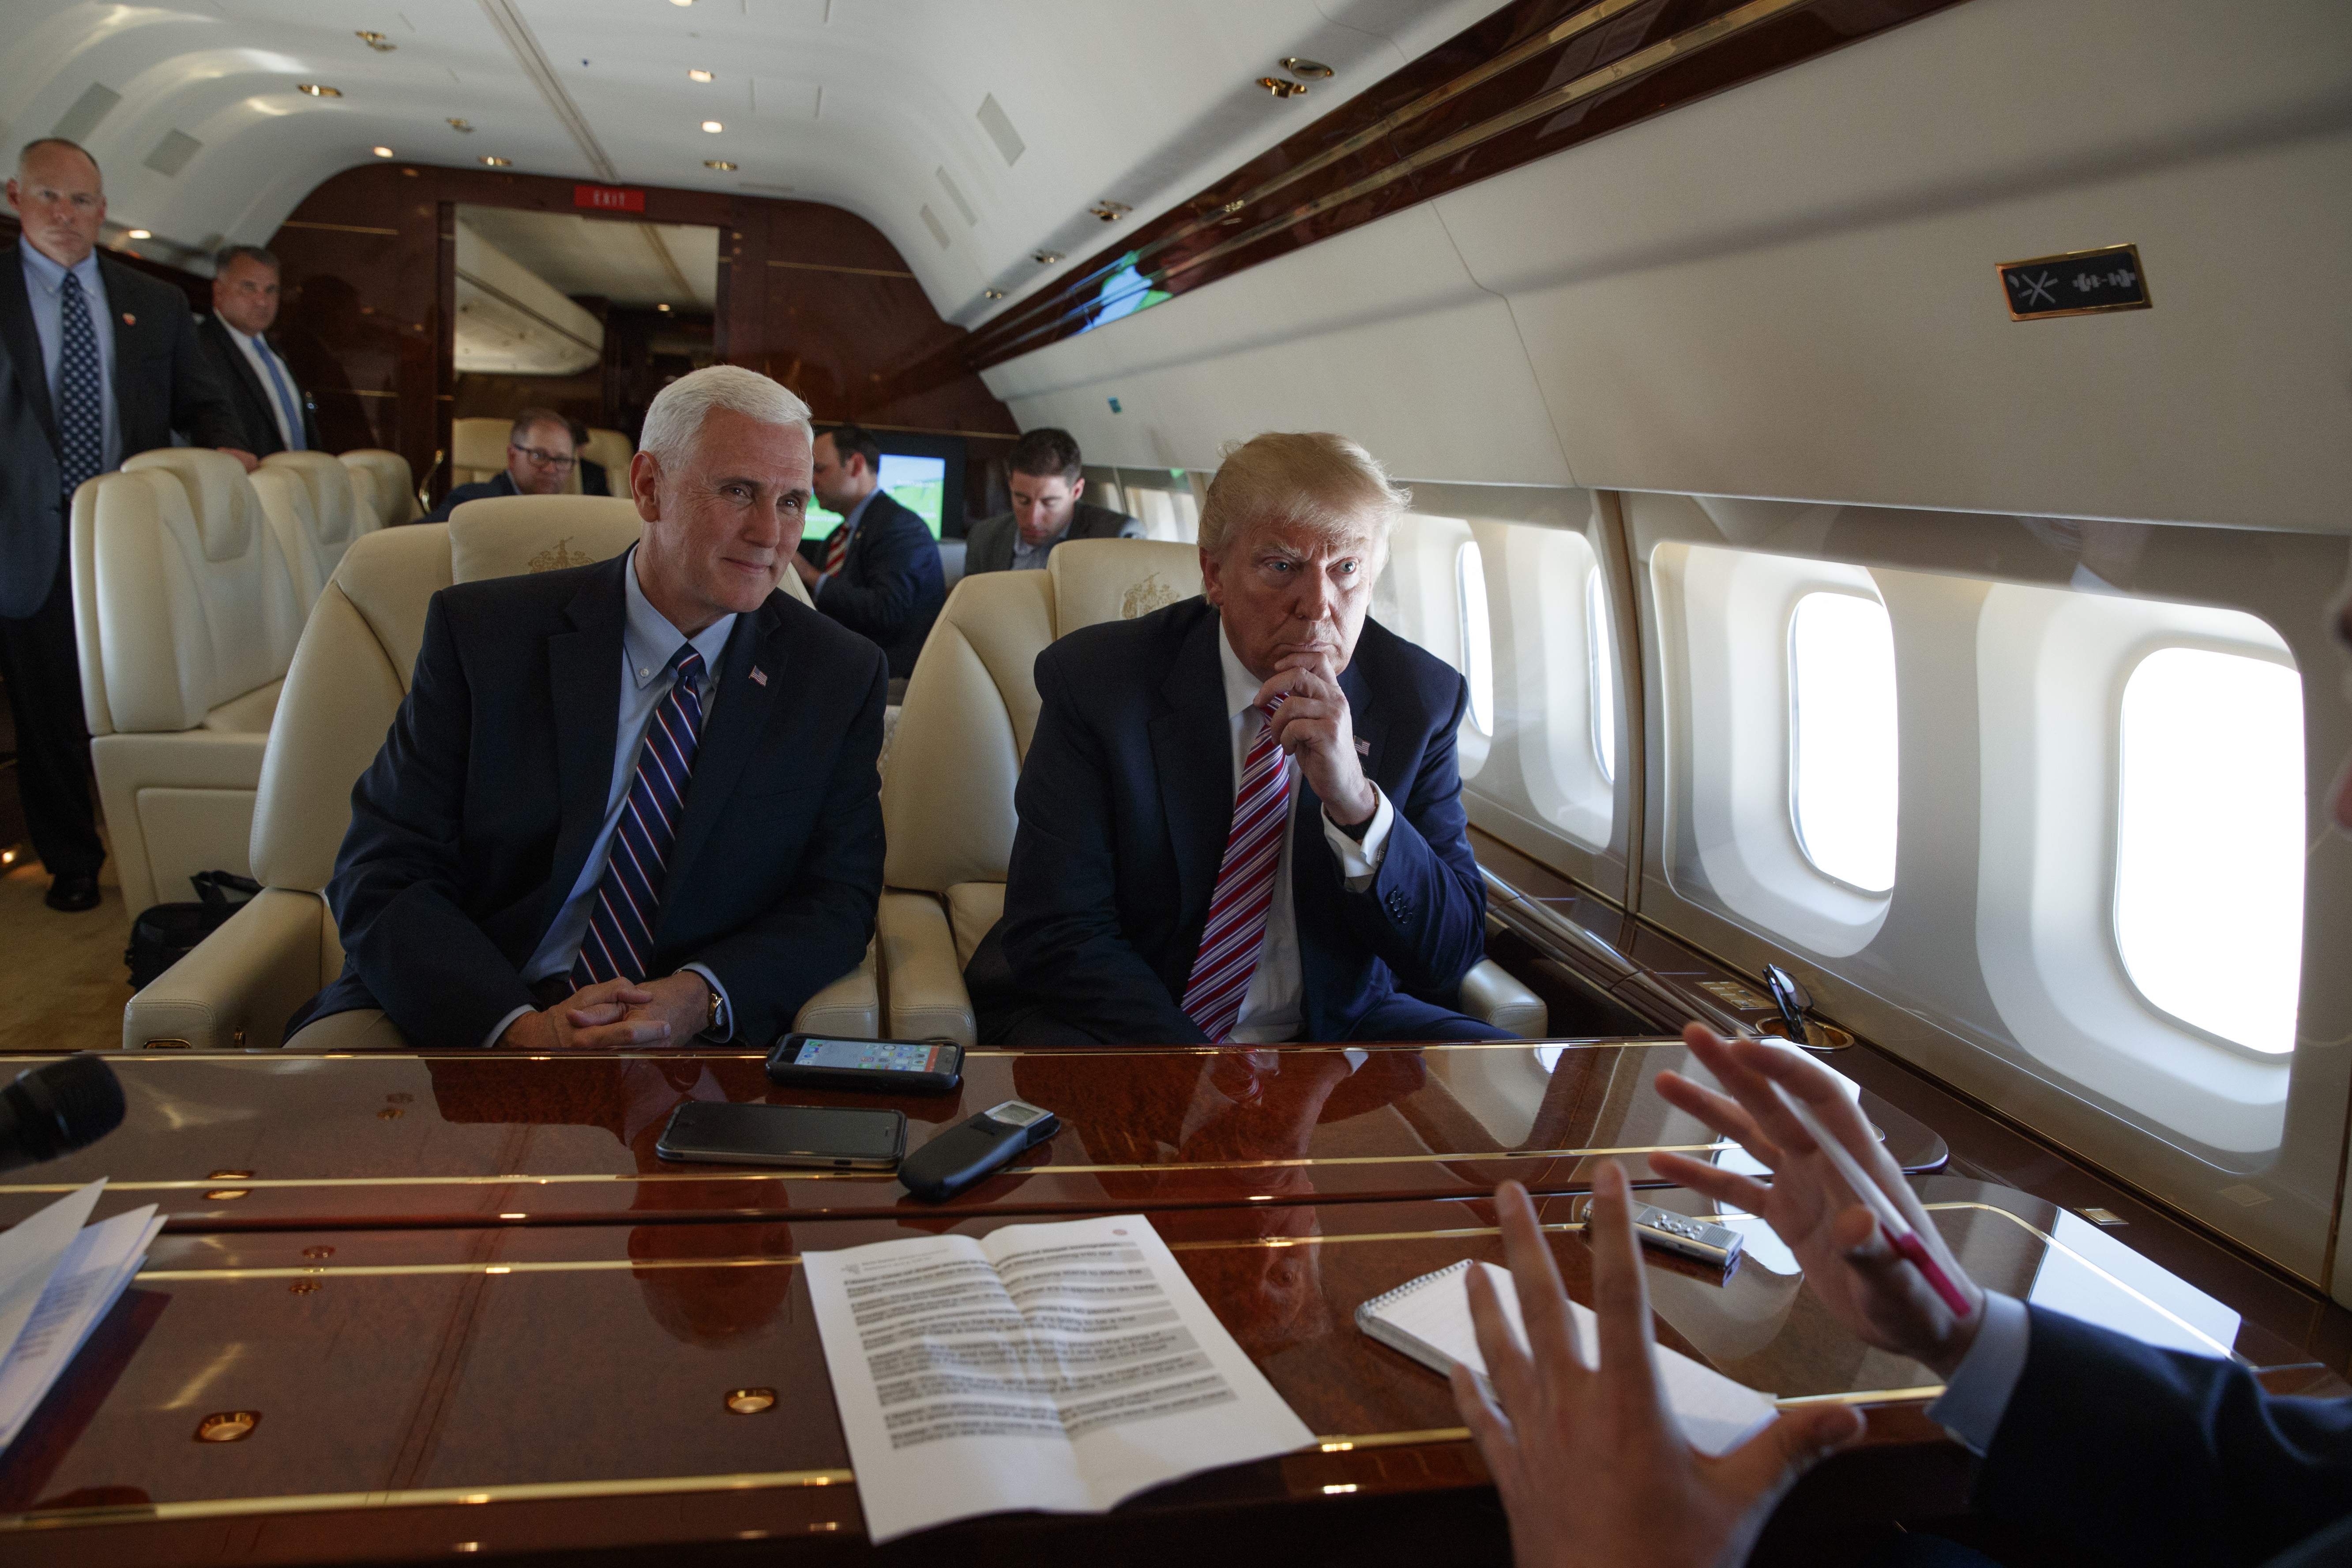 Republican presidential candidate Donald Trump talks with press,  Sept. 5, 2016, aboard his campaign plane while flying over Ohio, as Vice presidential candidate Gov. Mike Pence, R-Ind., left, looks on.